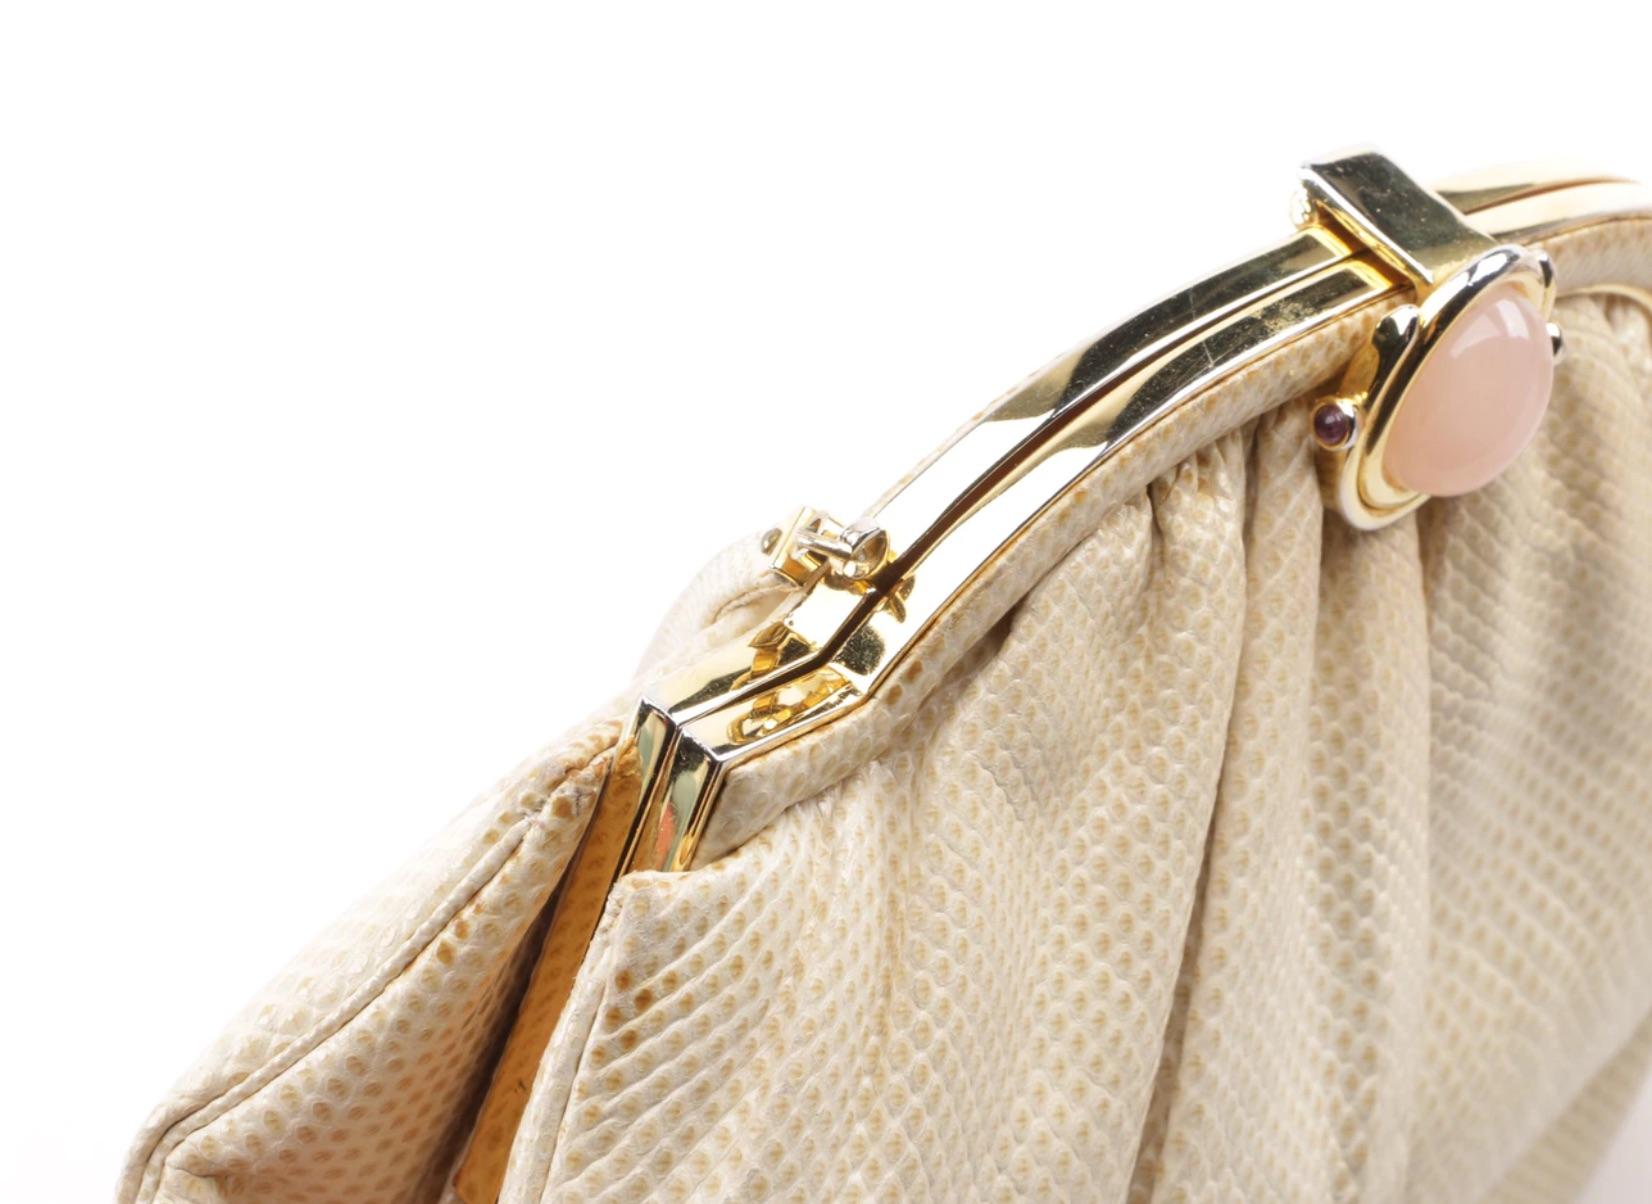 An early lovely sophisticated Judith Leiber cream karung snakeskin purse. The bag is styled with a gold tone hinged frame with a fold-over clasp featuring an oval framed Rose Quartz Cabochon, a thin shoulder strap and pleating to the body of the